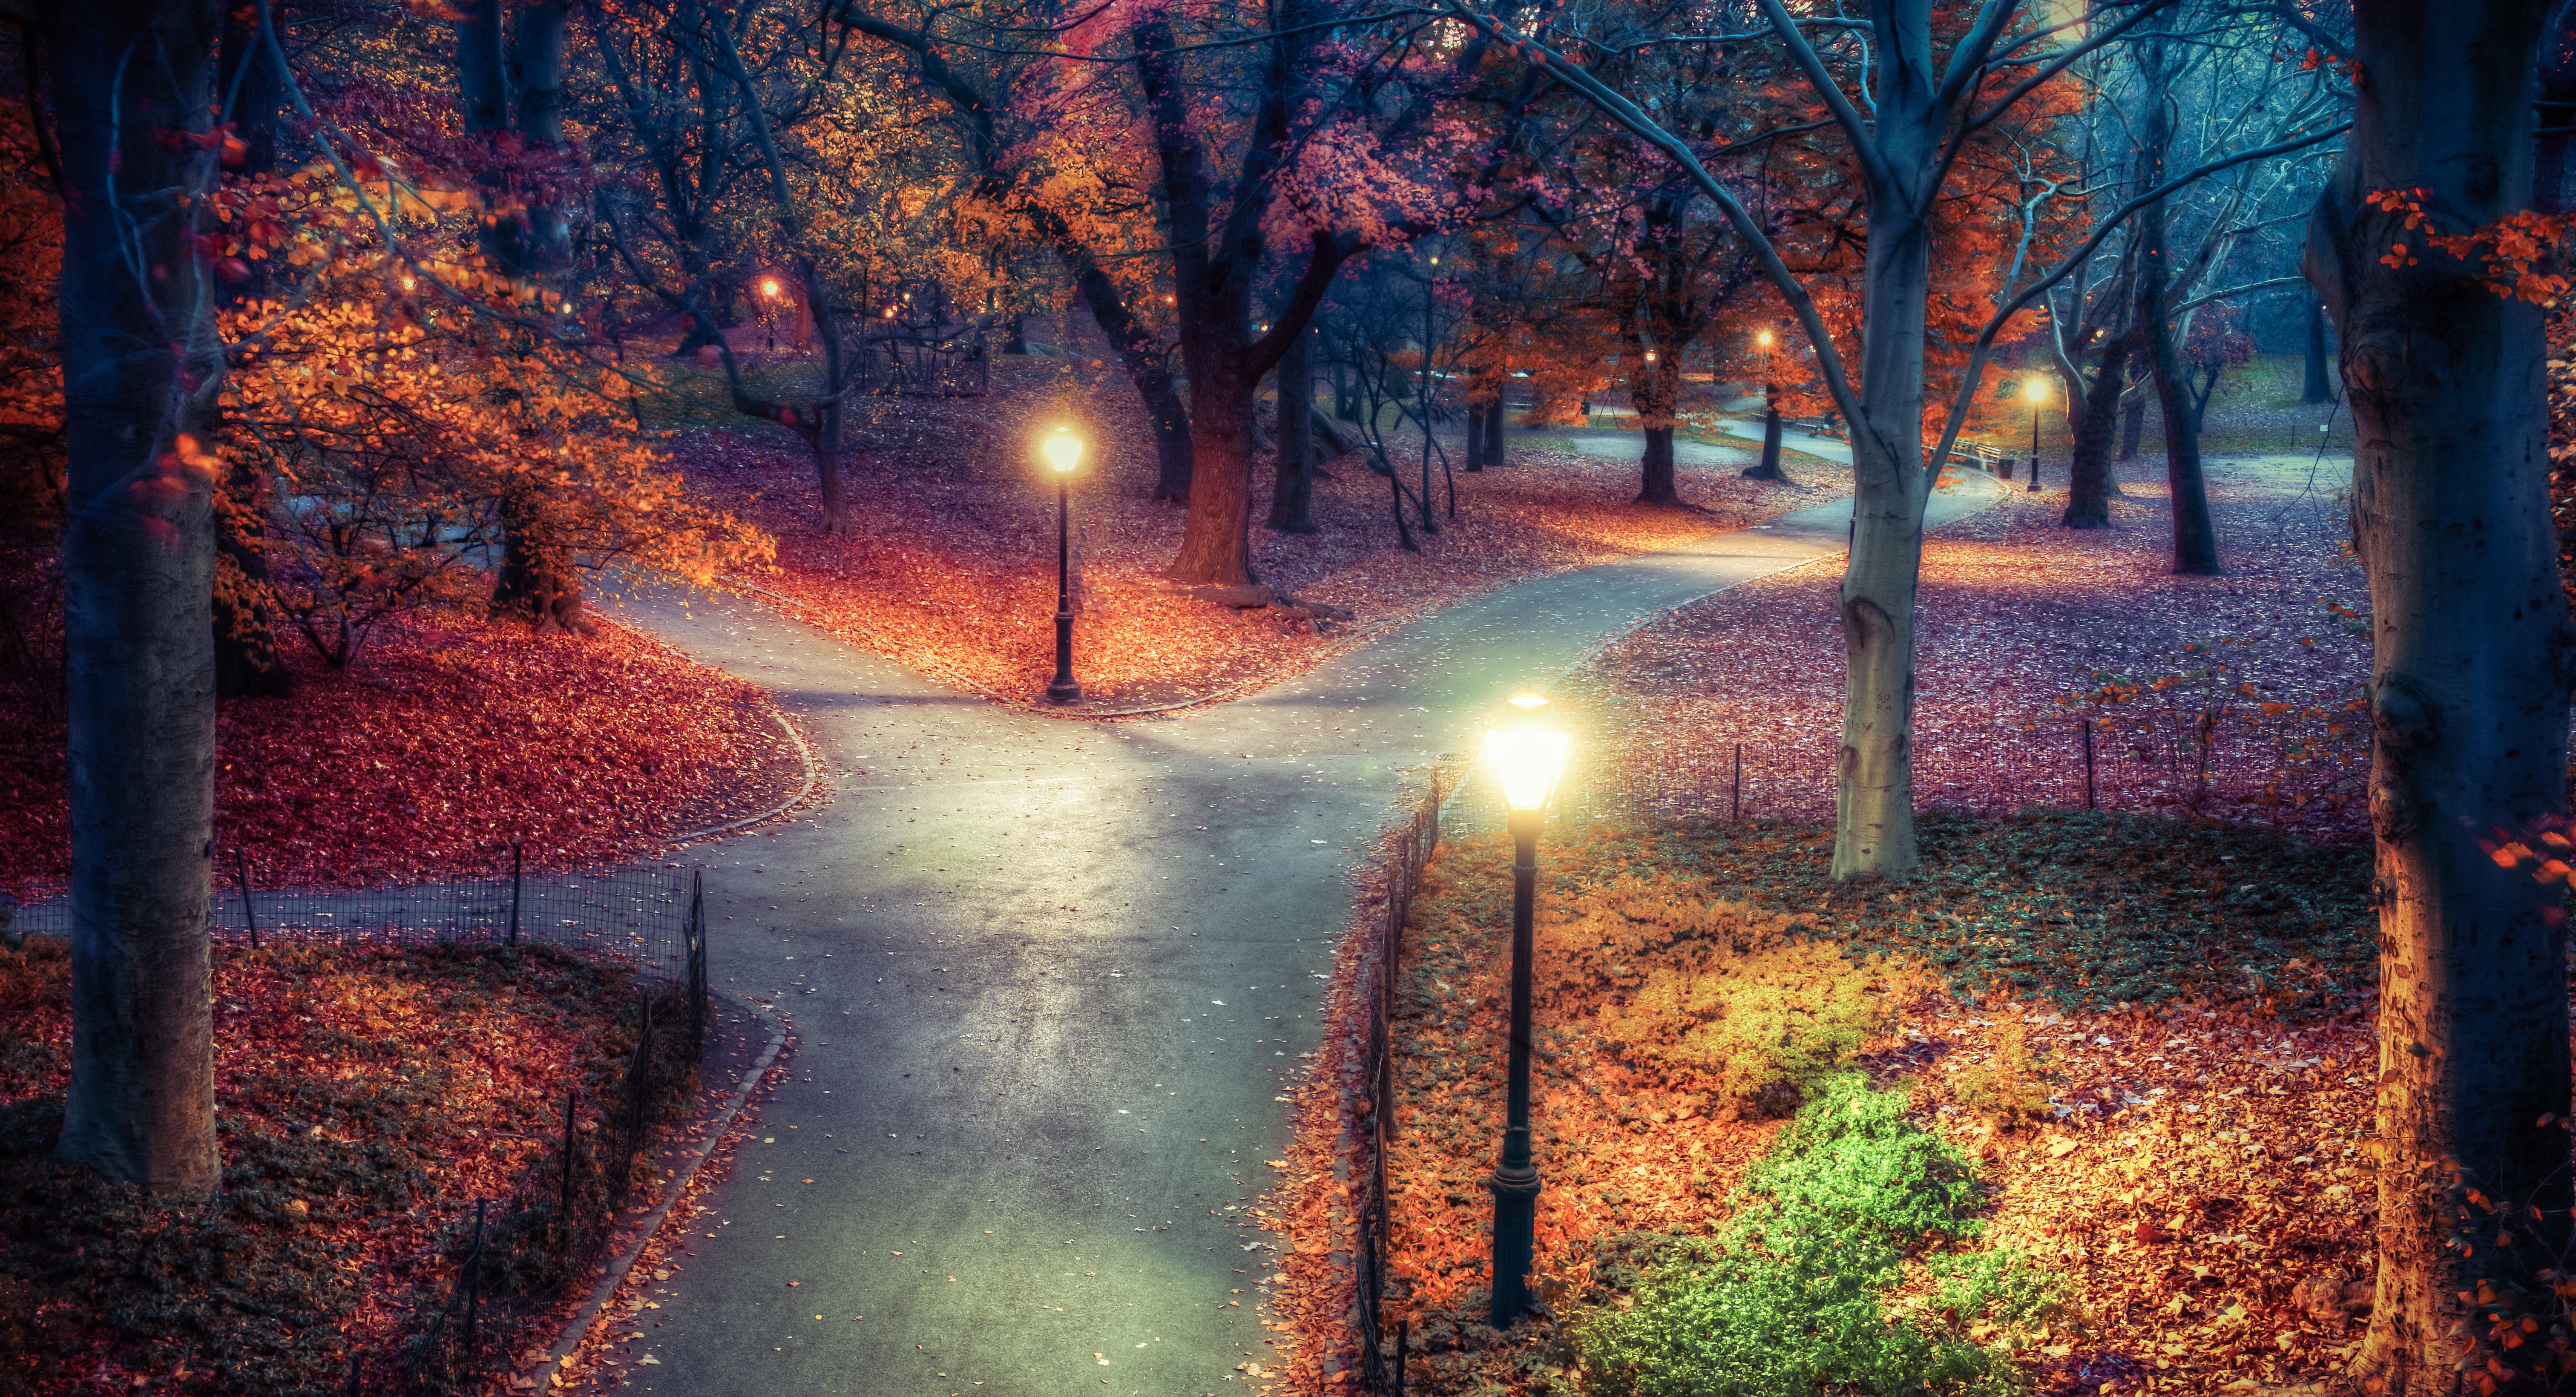 Nature Fall Leaves Trees Path Lamp Street Light Fallen Leaves Evening HDR Fence 6048x3280